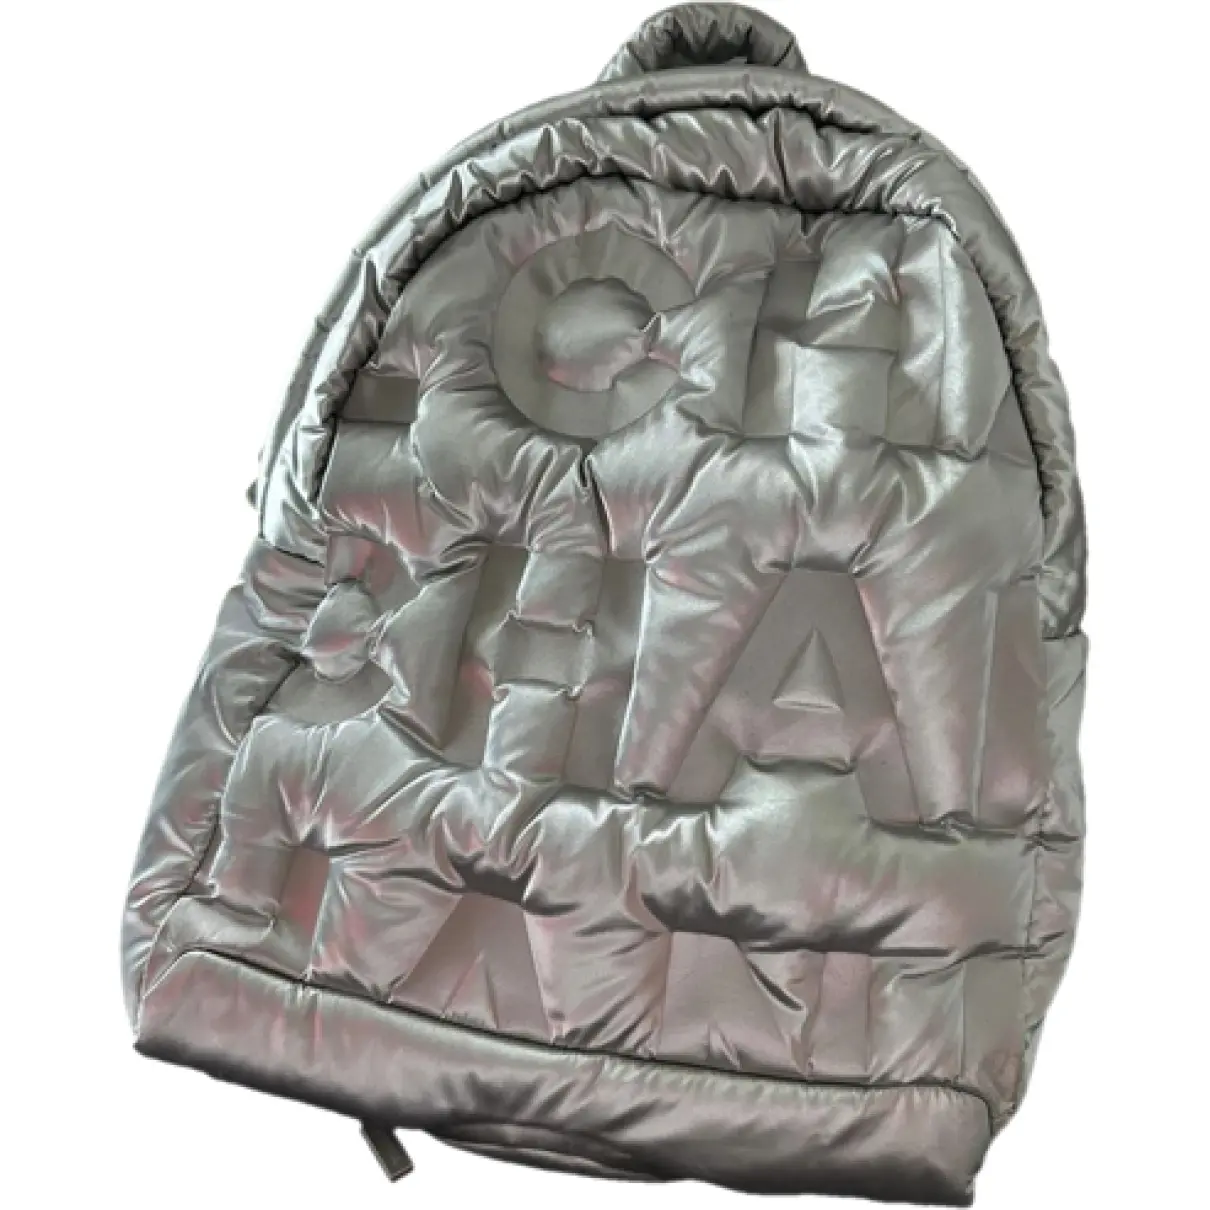 Cocoon cloth backpack